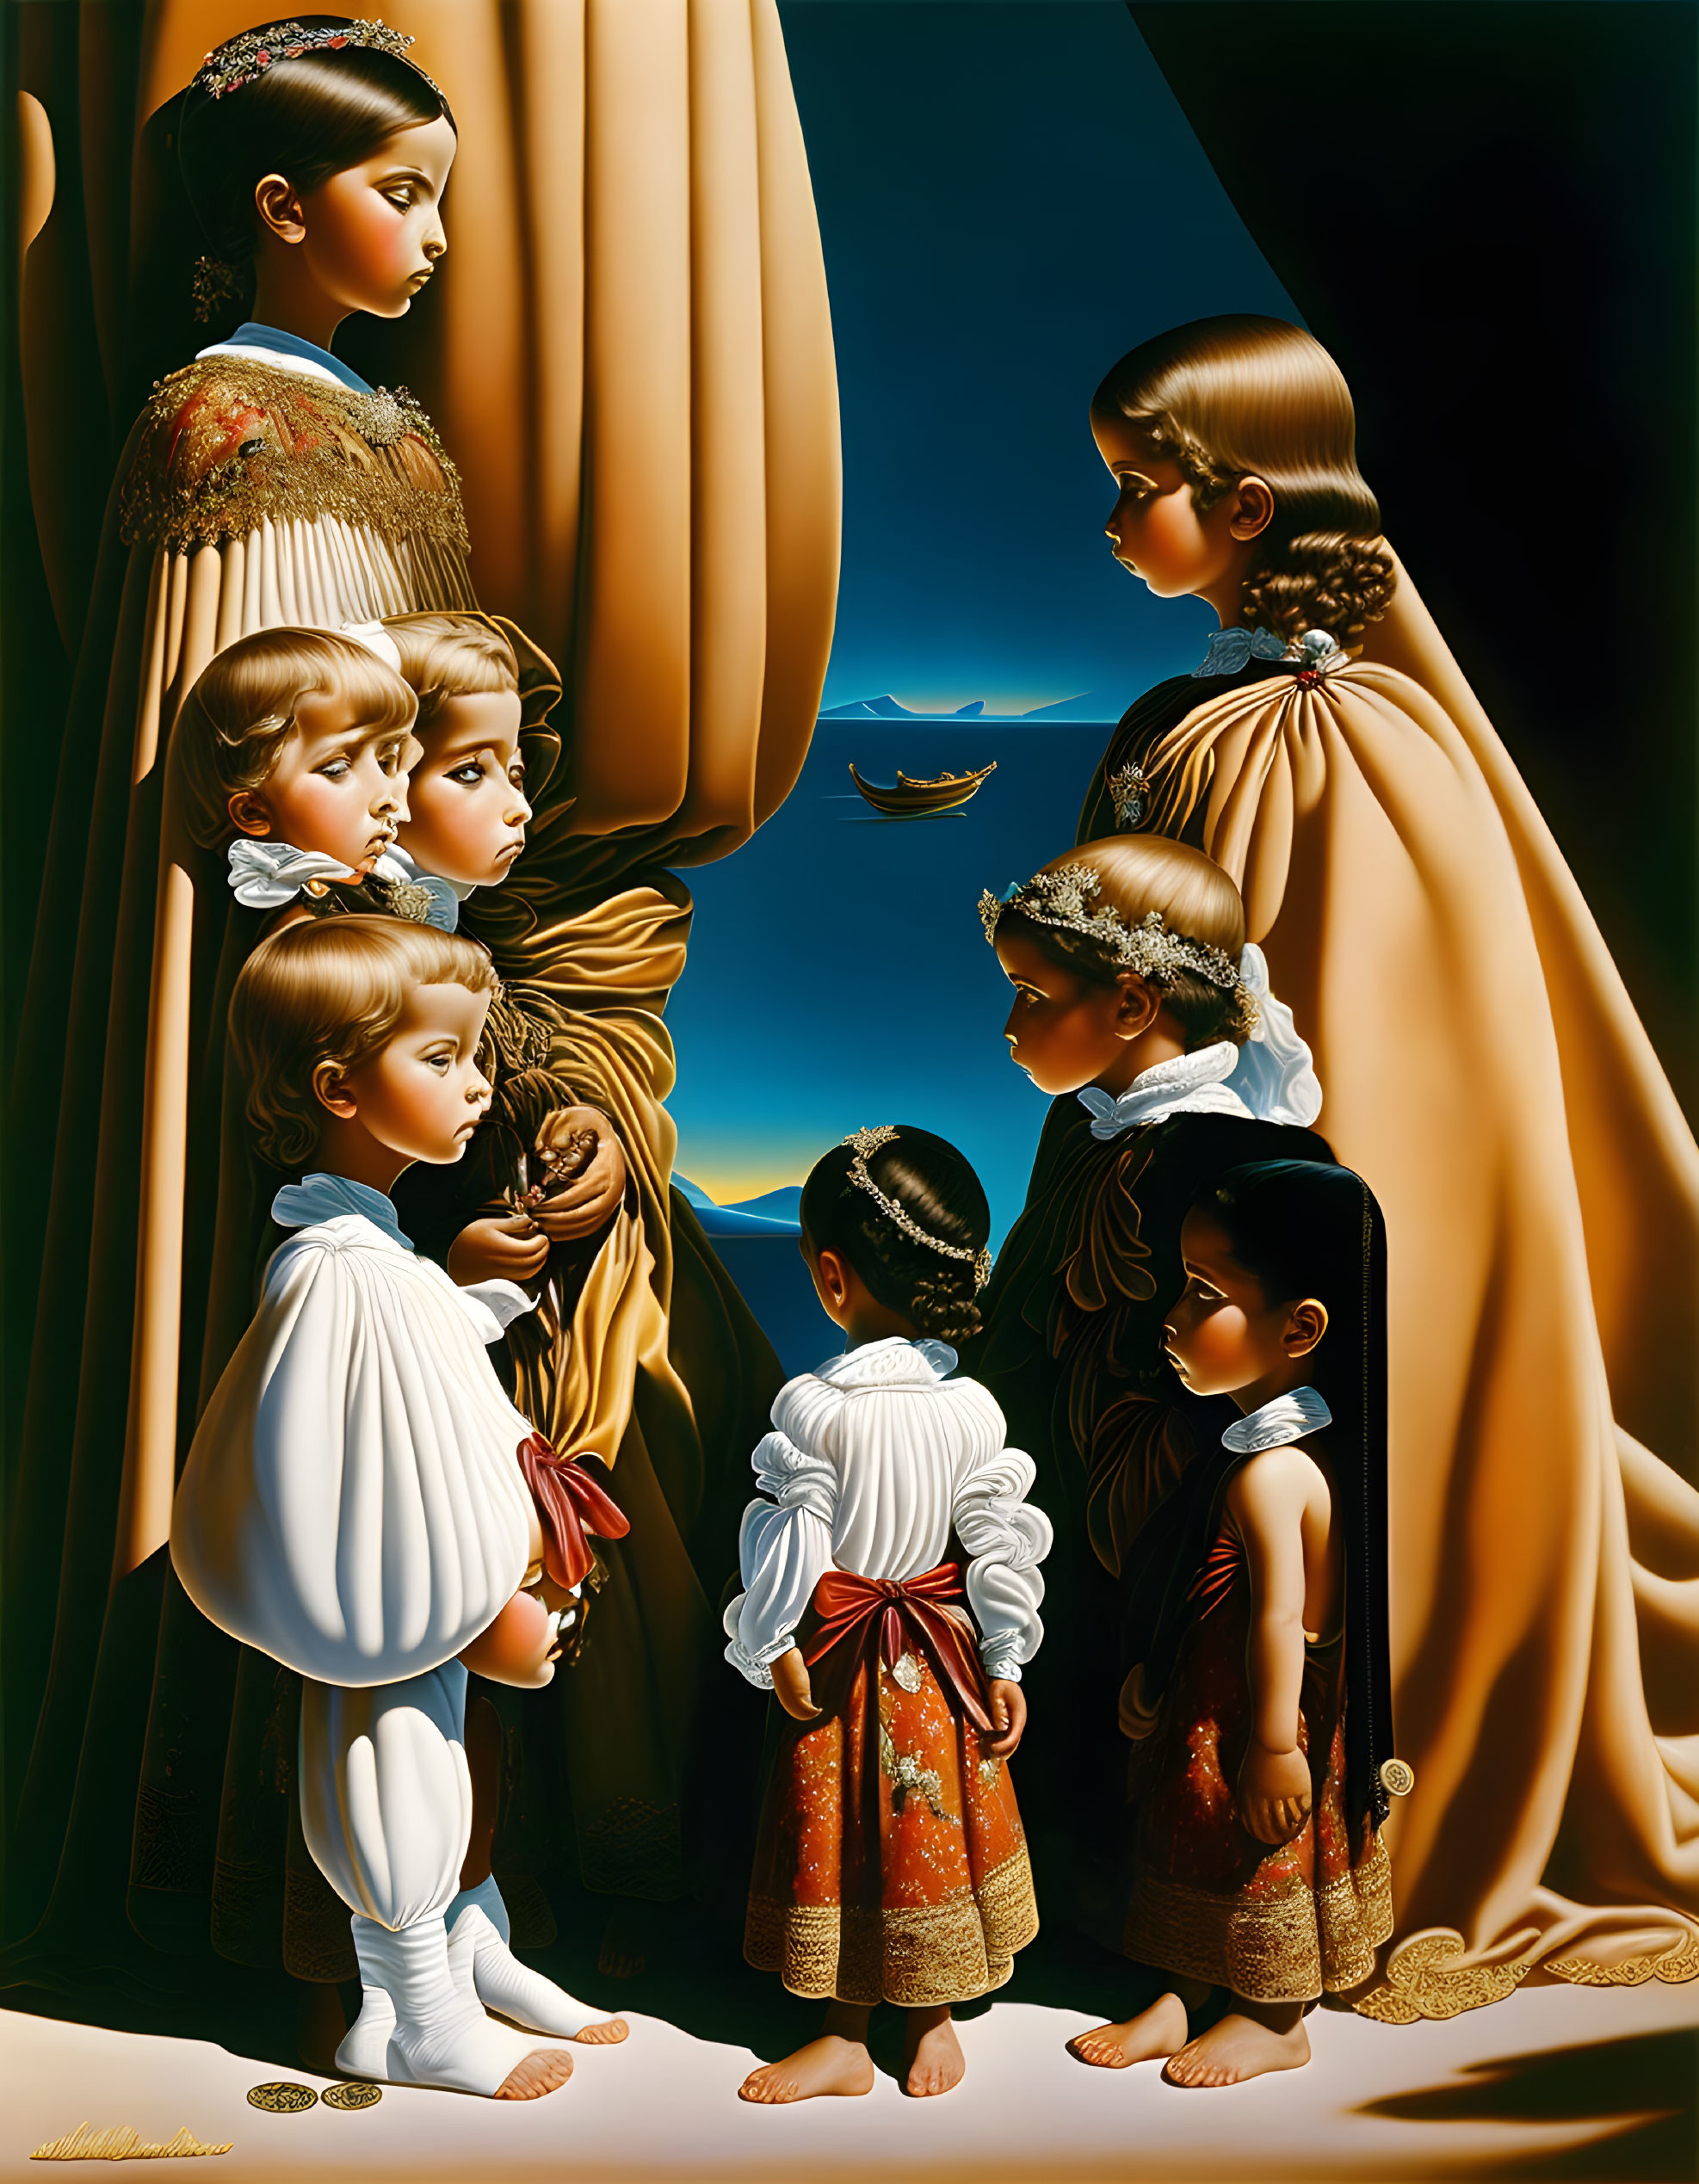 Surreal painting of seven children in vintage clothing with theatrical curtains and a flying bird